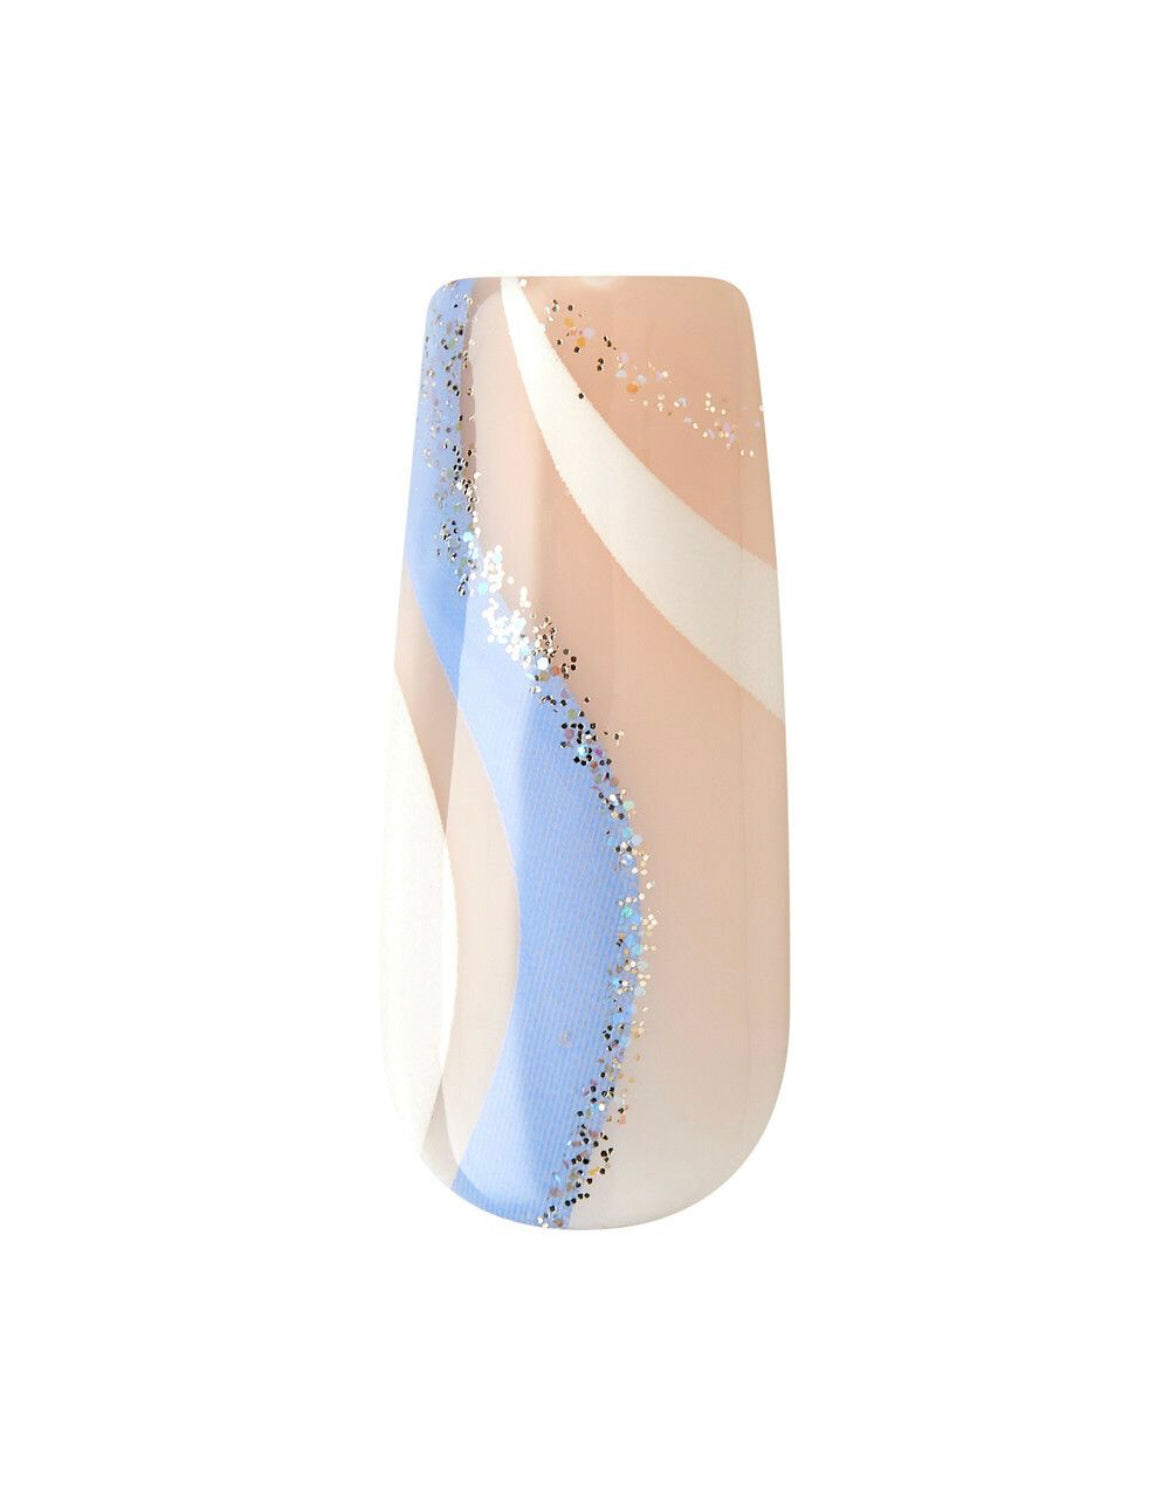 KISS | GOLD FINGER TRENDY NAILS- UNDERNEATH THE TREE